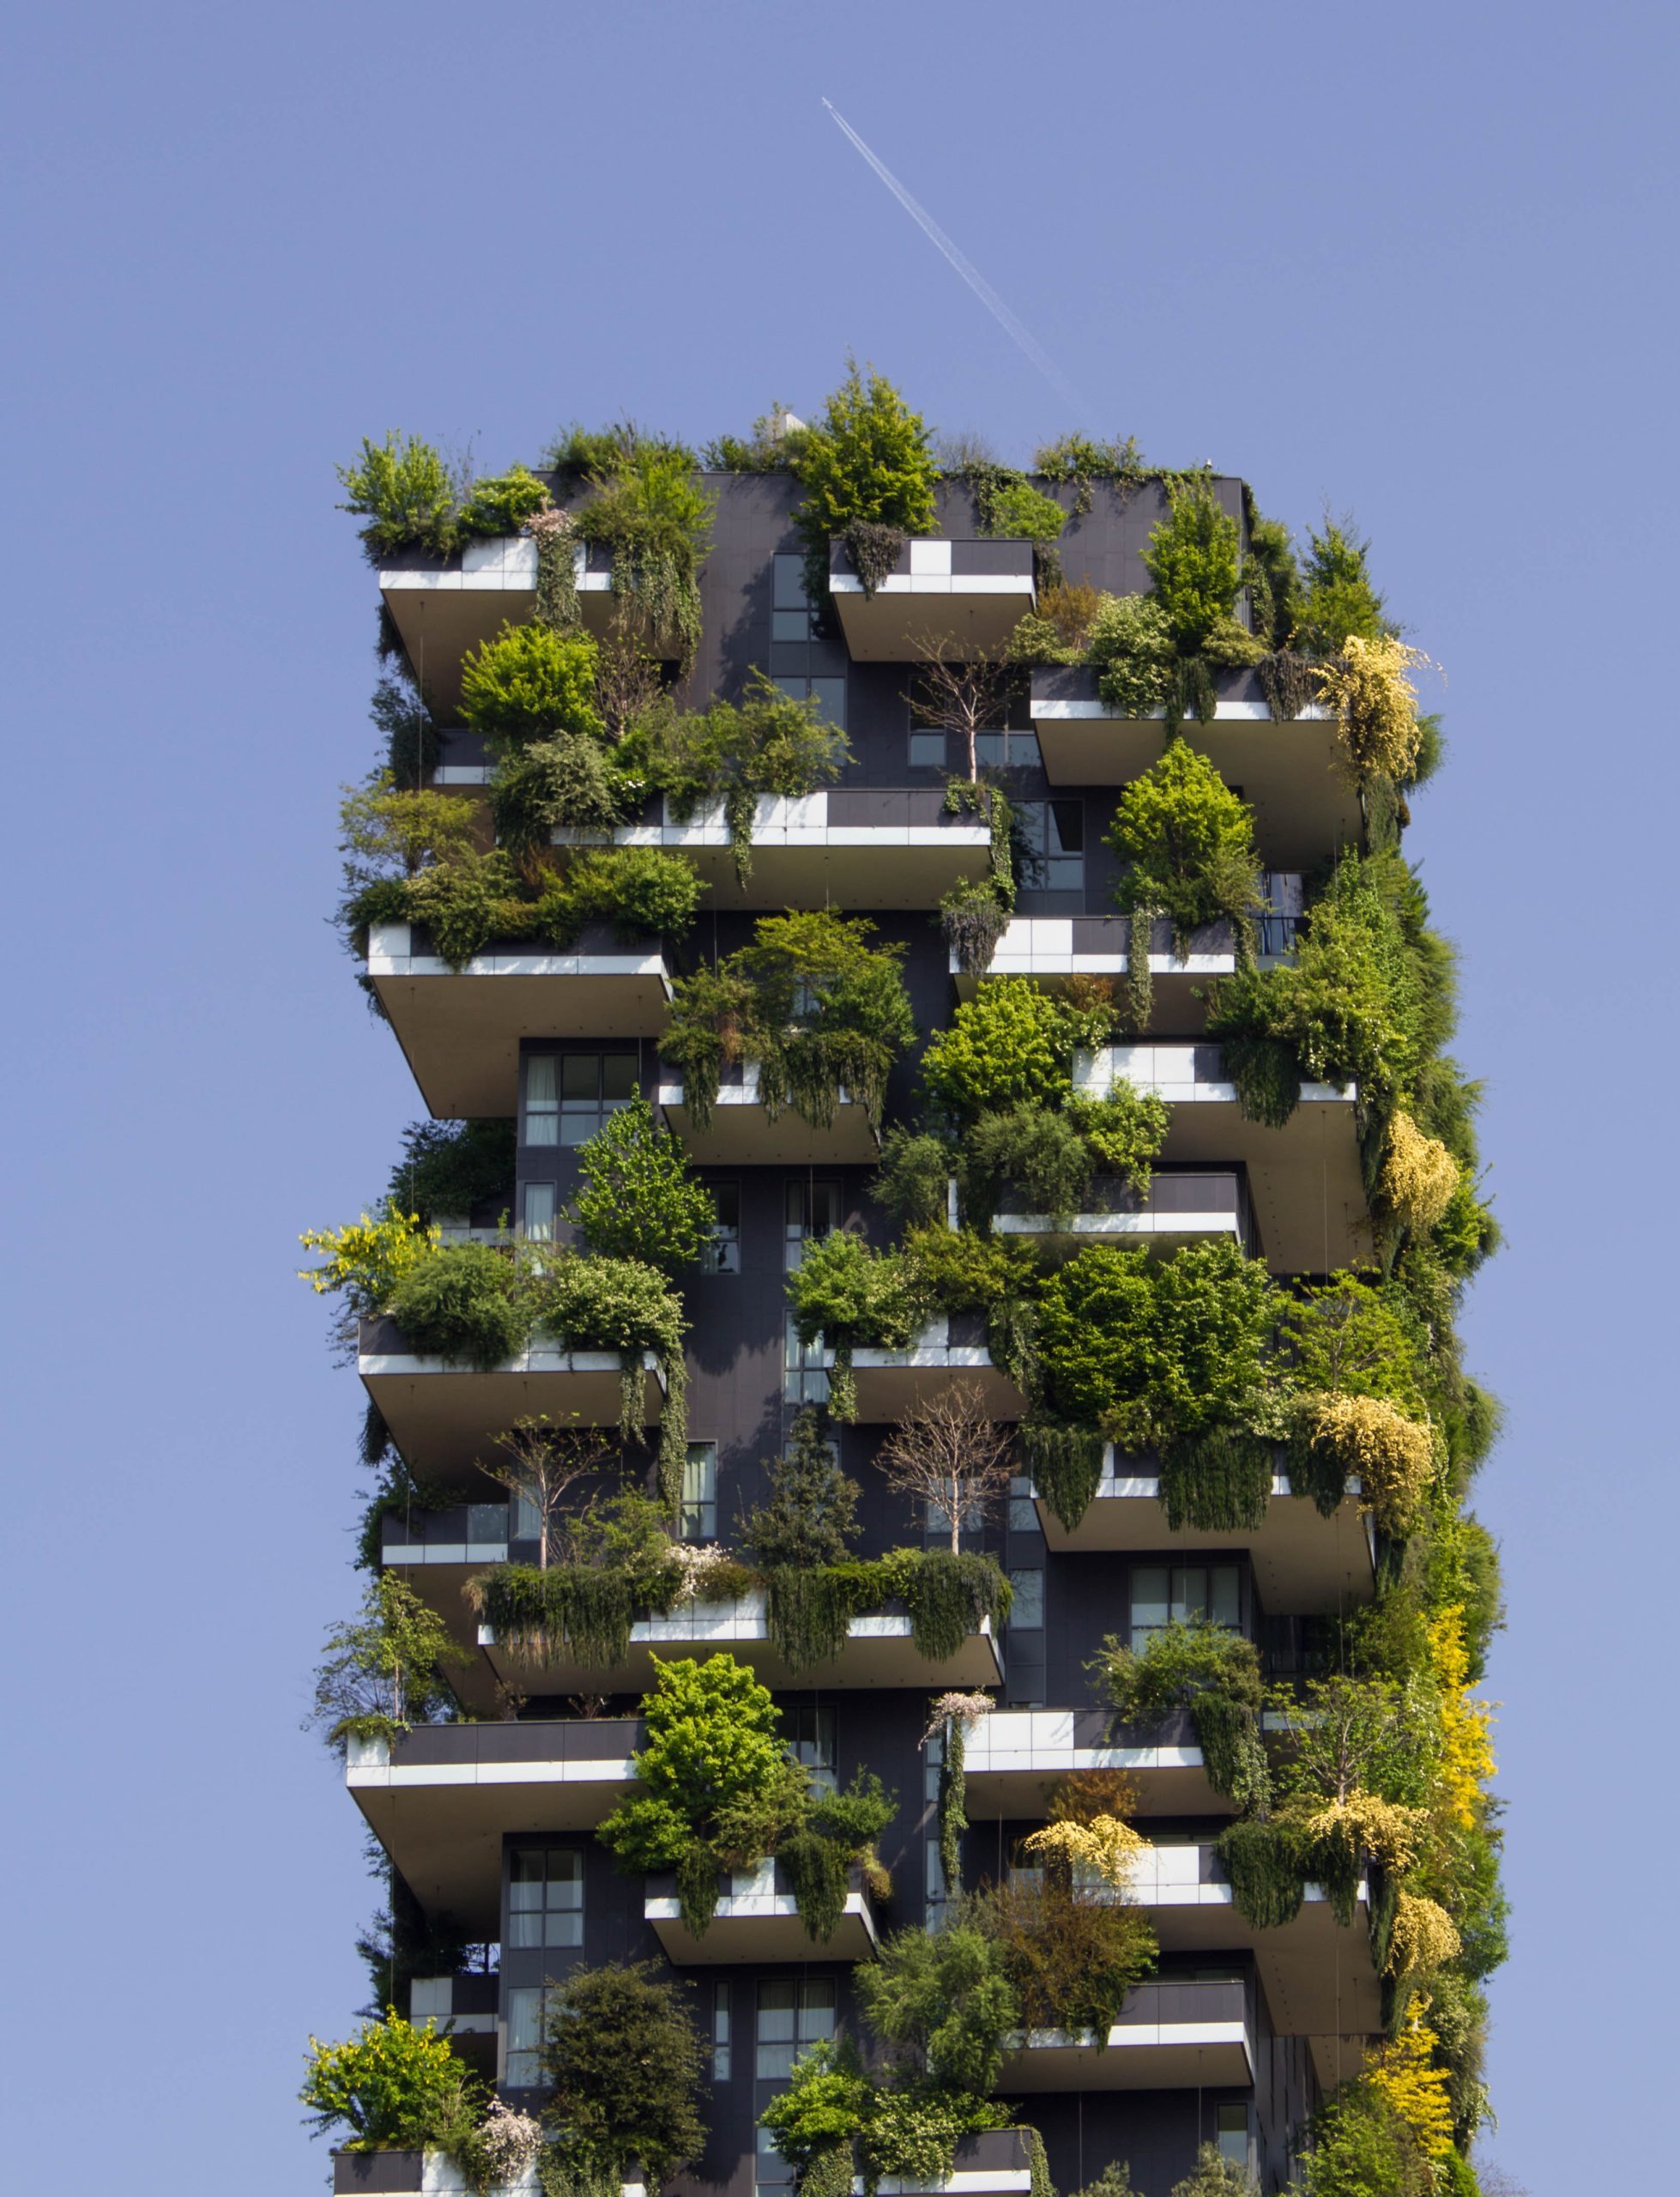 An Italian building with lush greenery coming out of it stands tall against the blue sky.